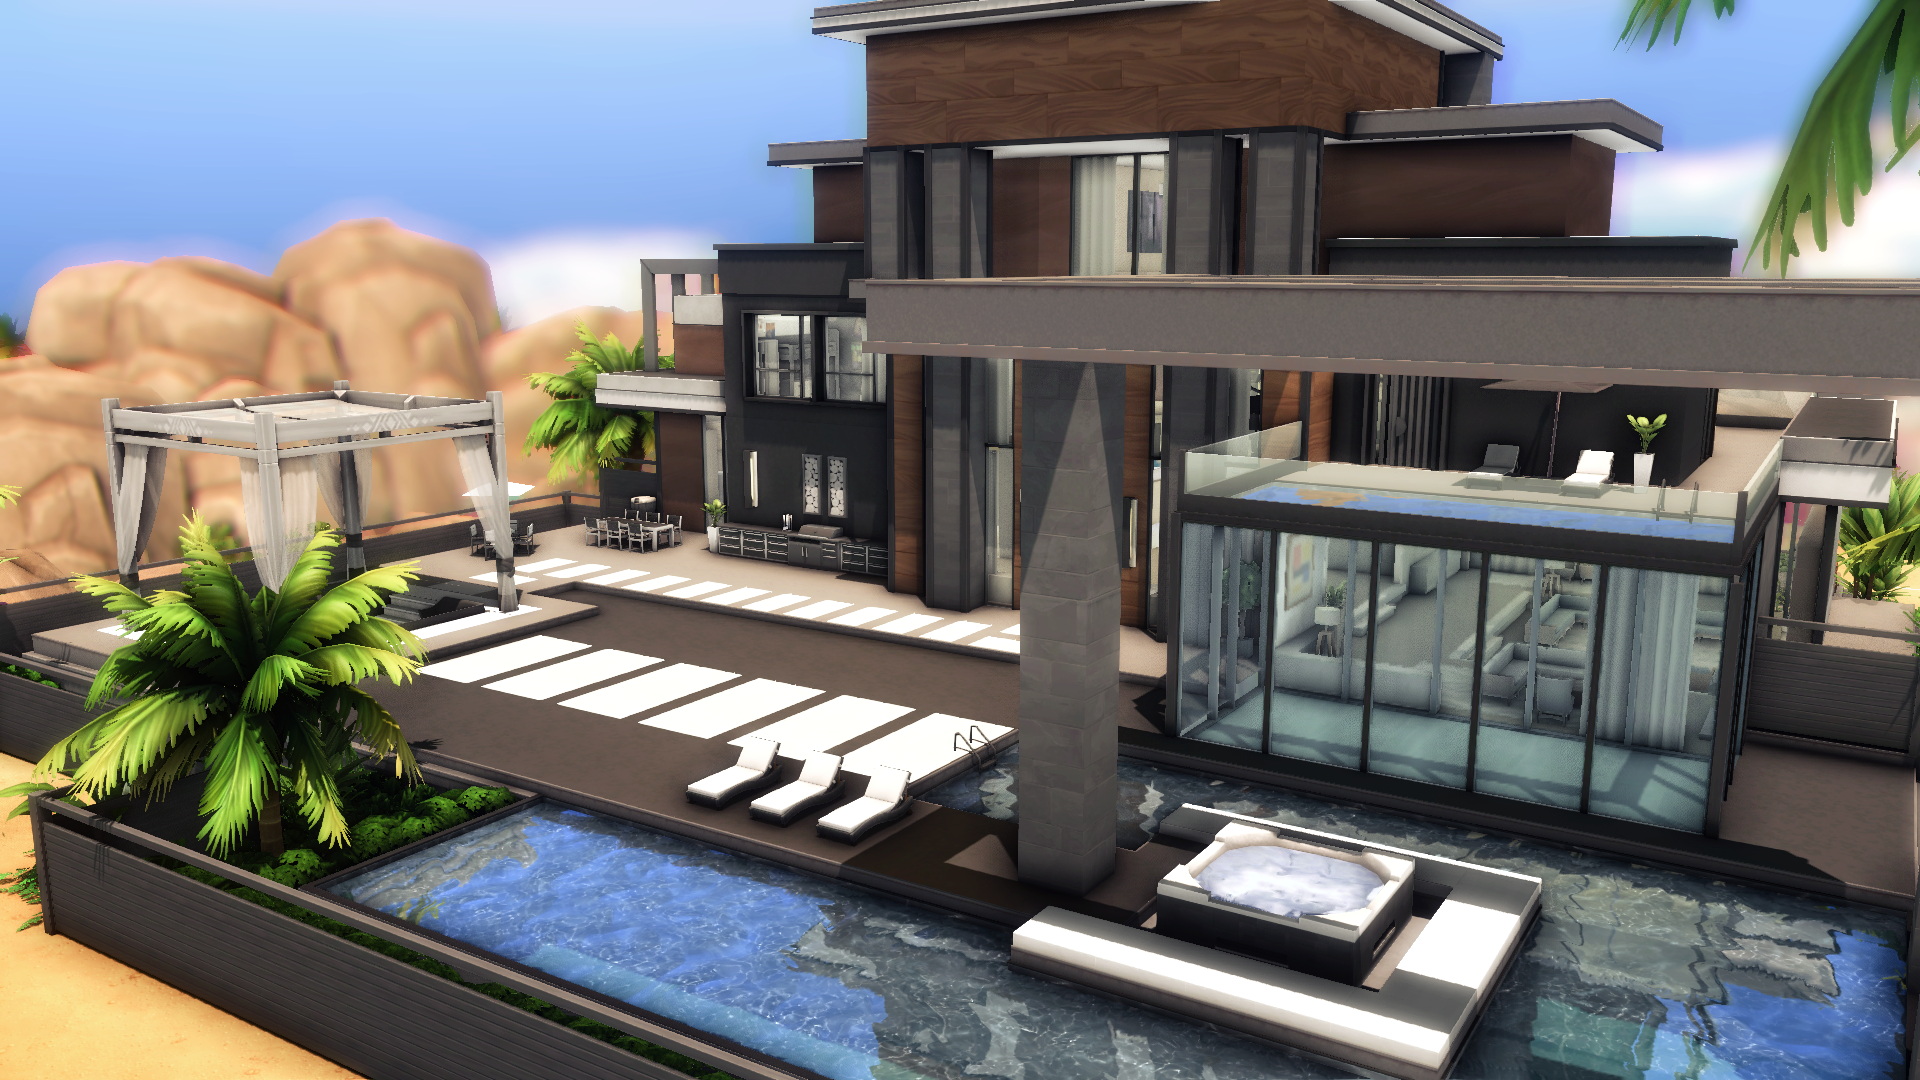 Super Modern Mansion by plumbobkingdom at Mod The Sims 4 » Sims 4 Updates